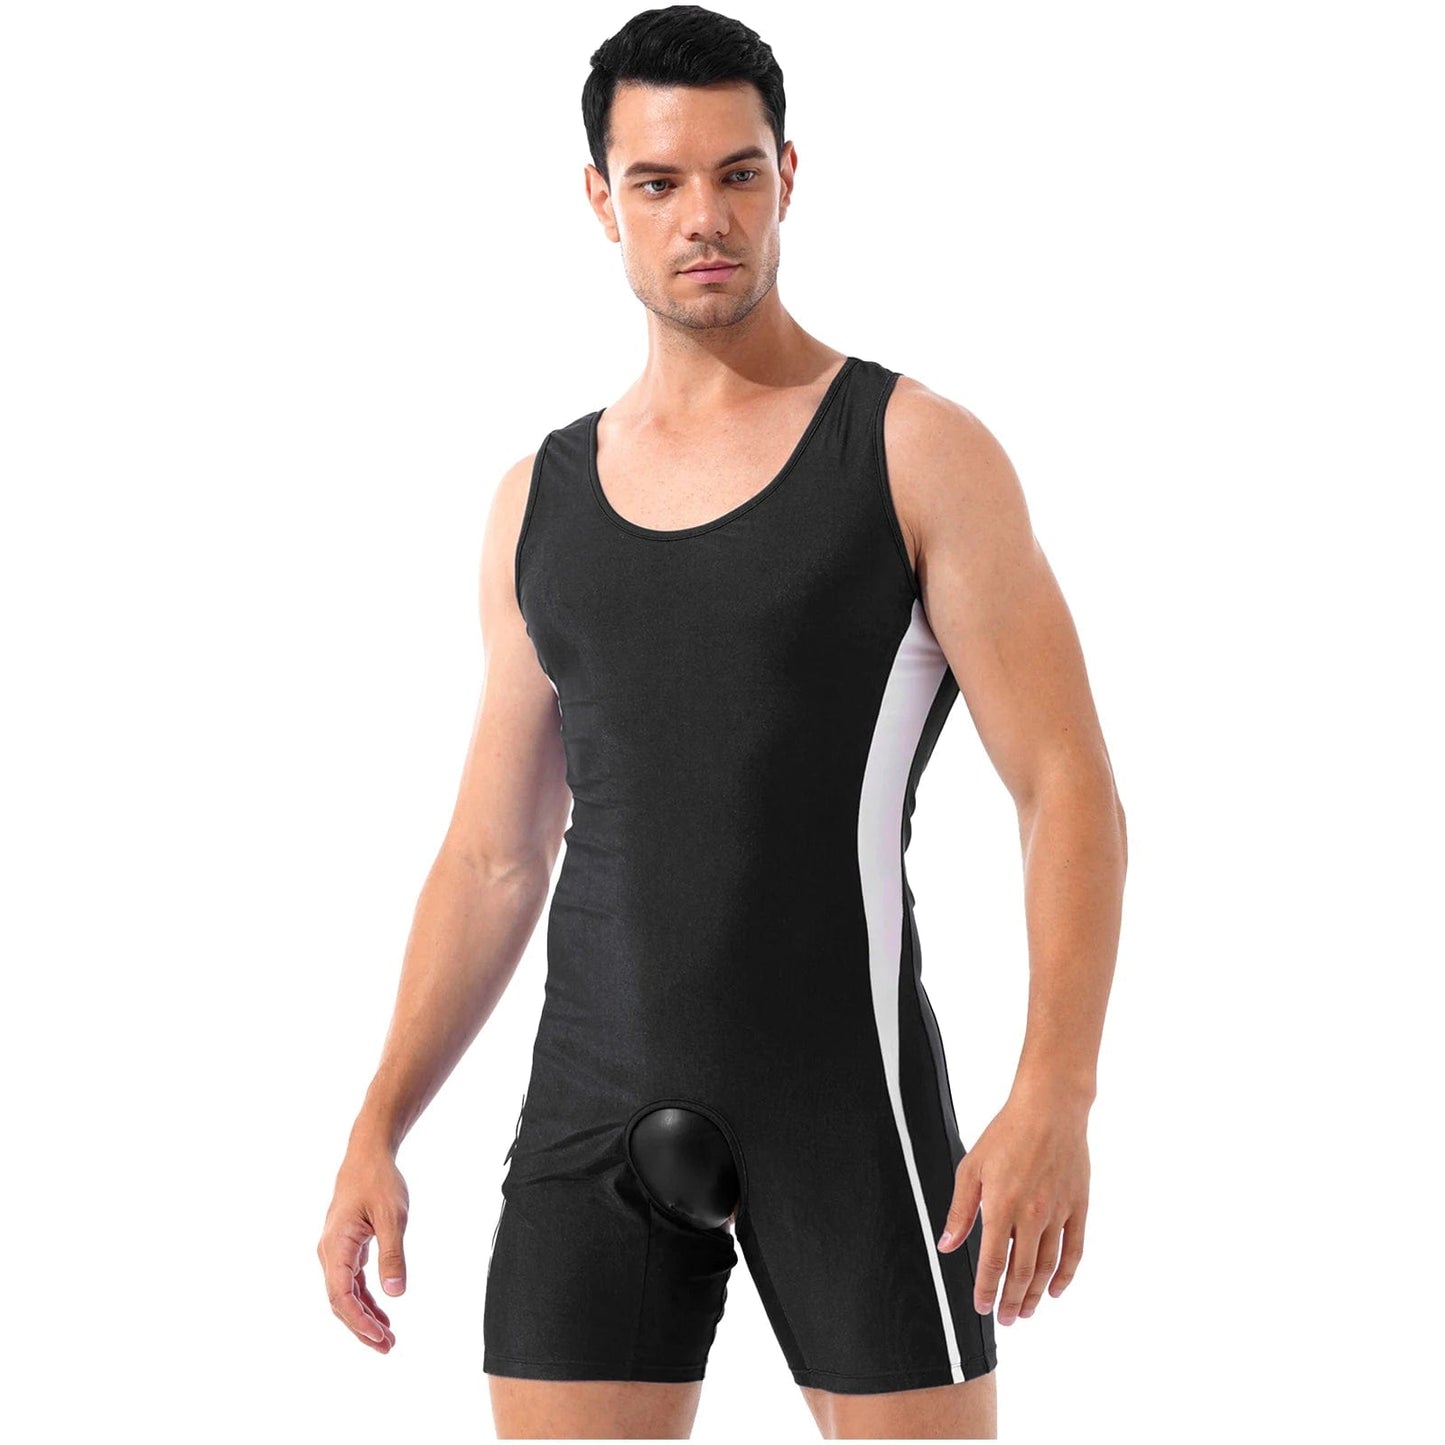 Kinky Cloth Black / M Mens Crotchless Open Butt Jumpsuit